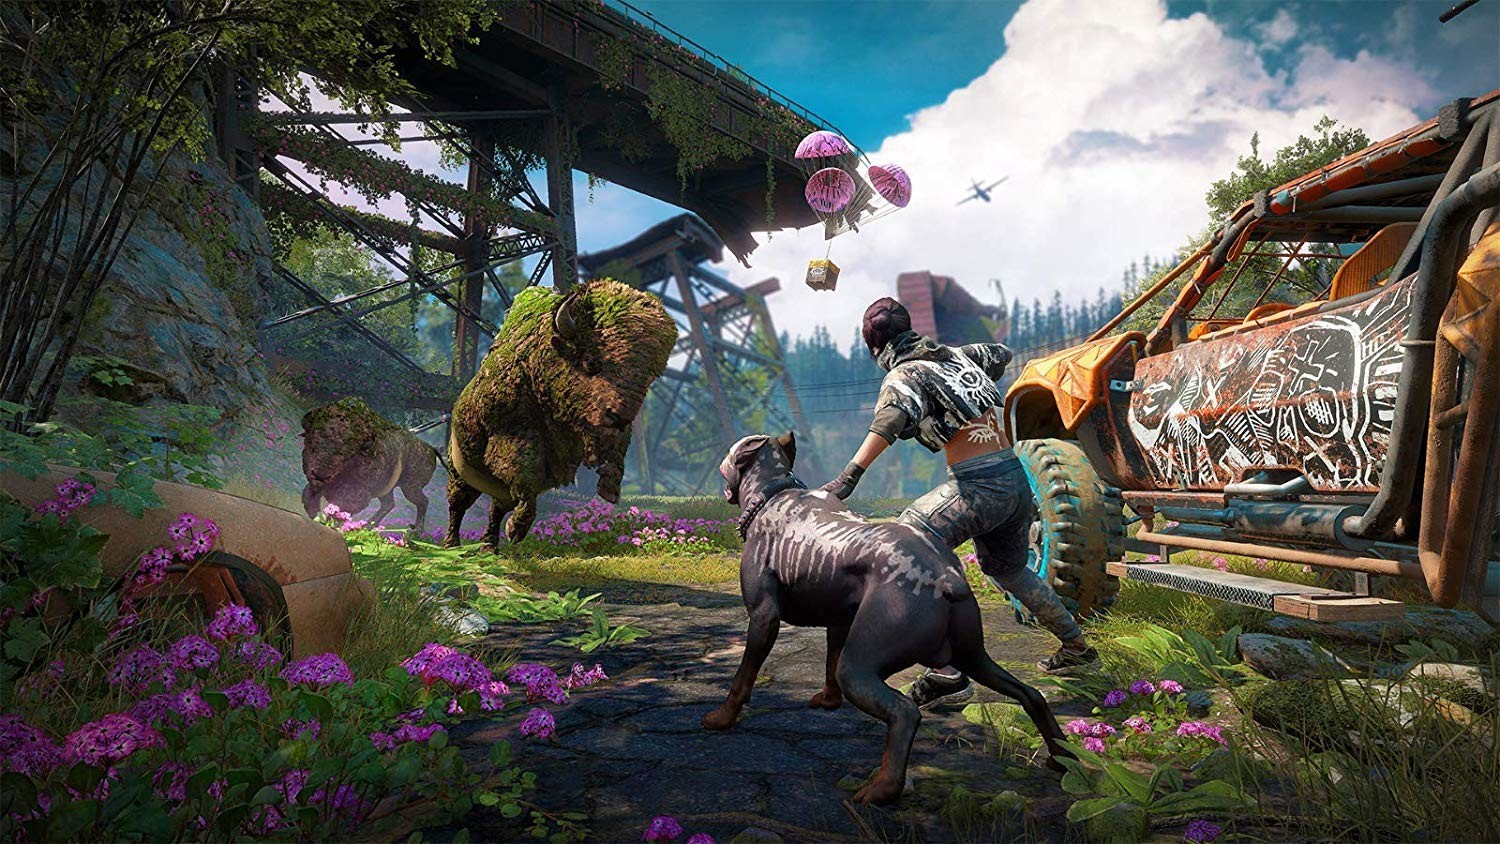 free download ps4 far cry new dawn